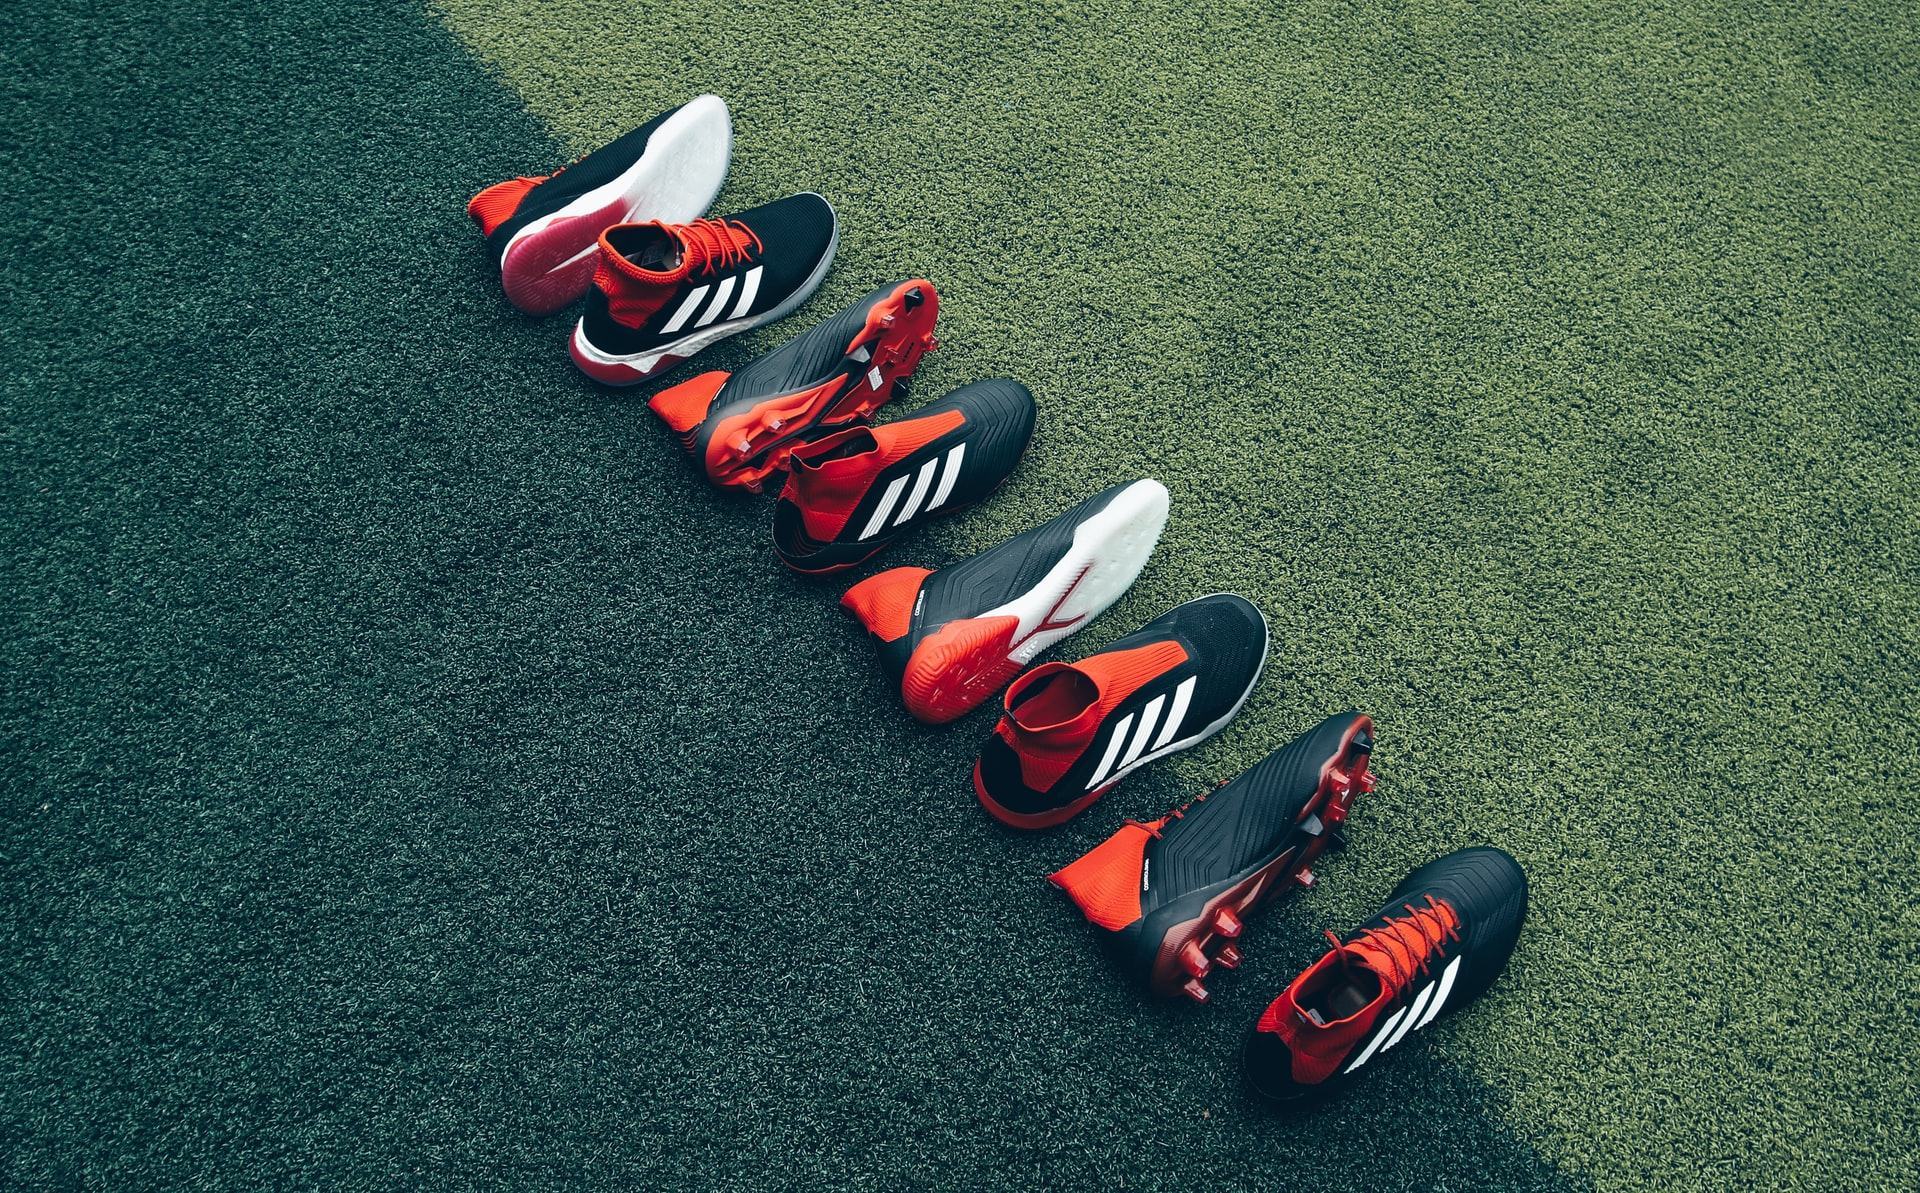 The best soccer cleats for wide feet